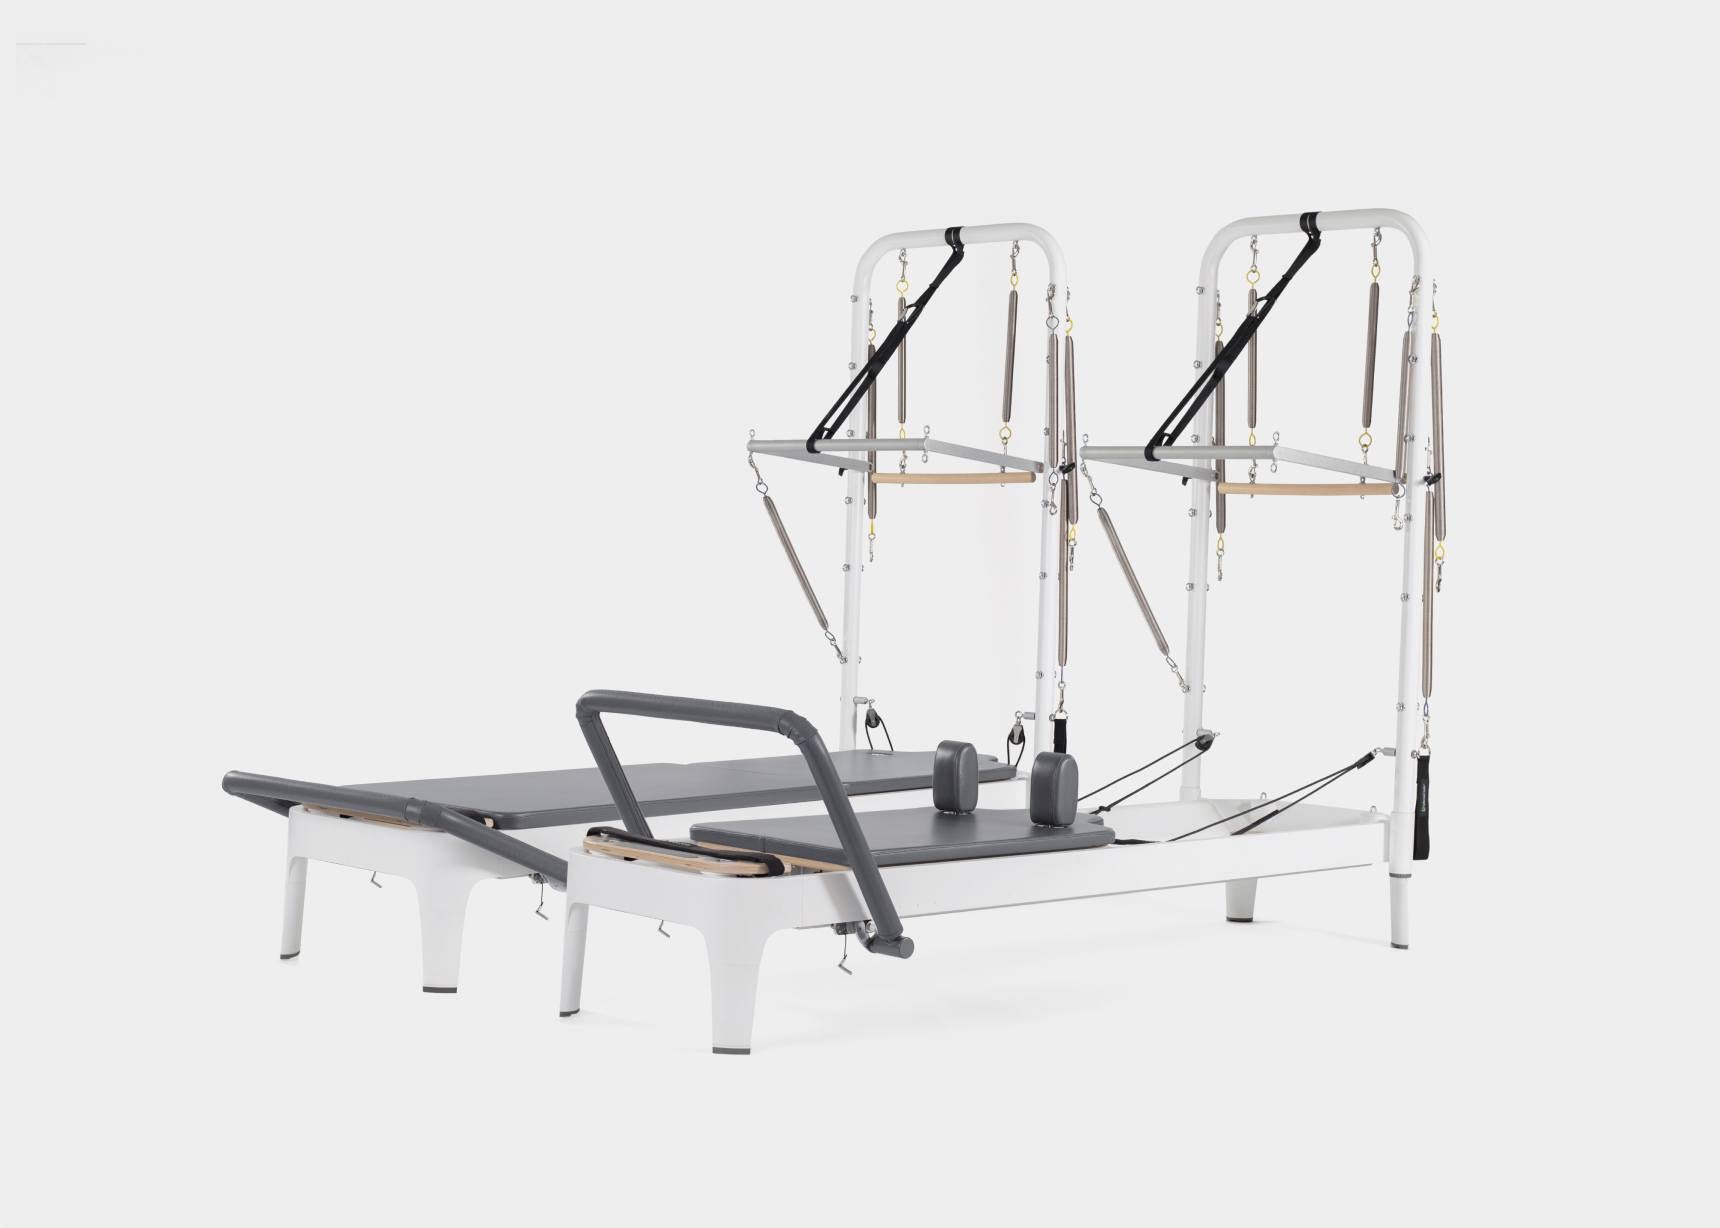 Enhance your Pilates reformer with this kit for added versatility and resistance training.